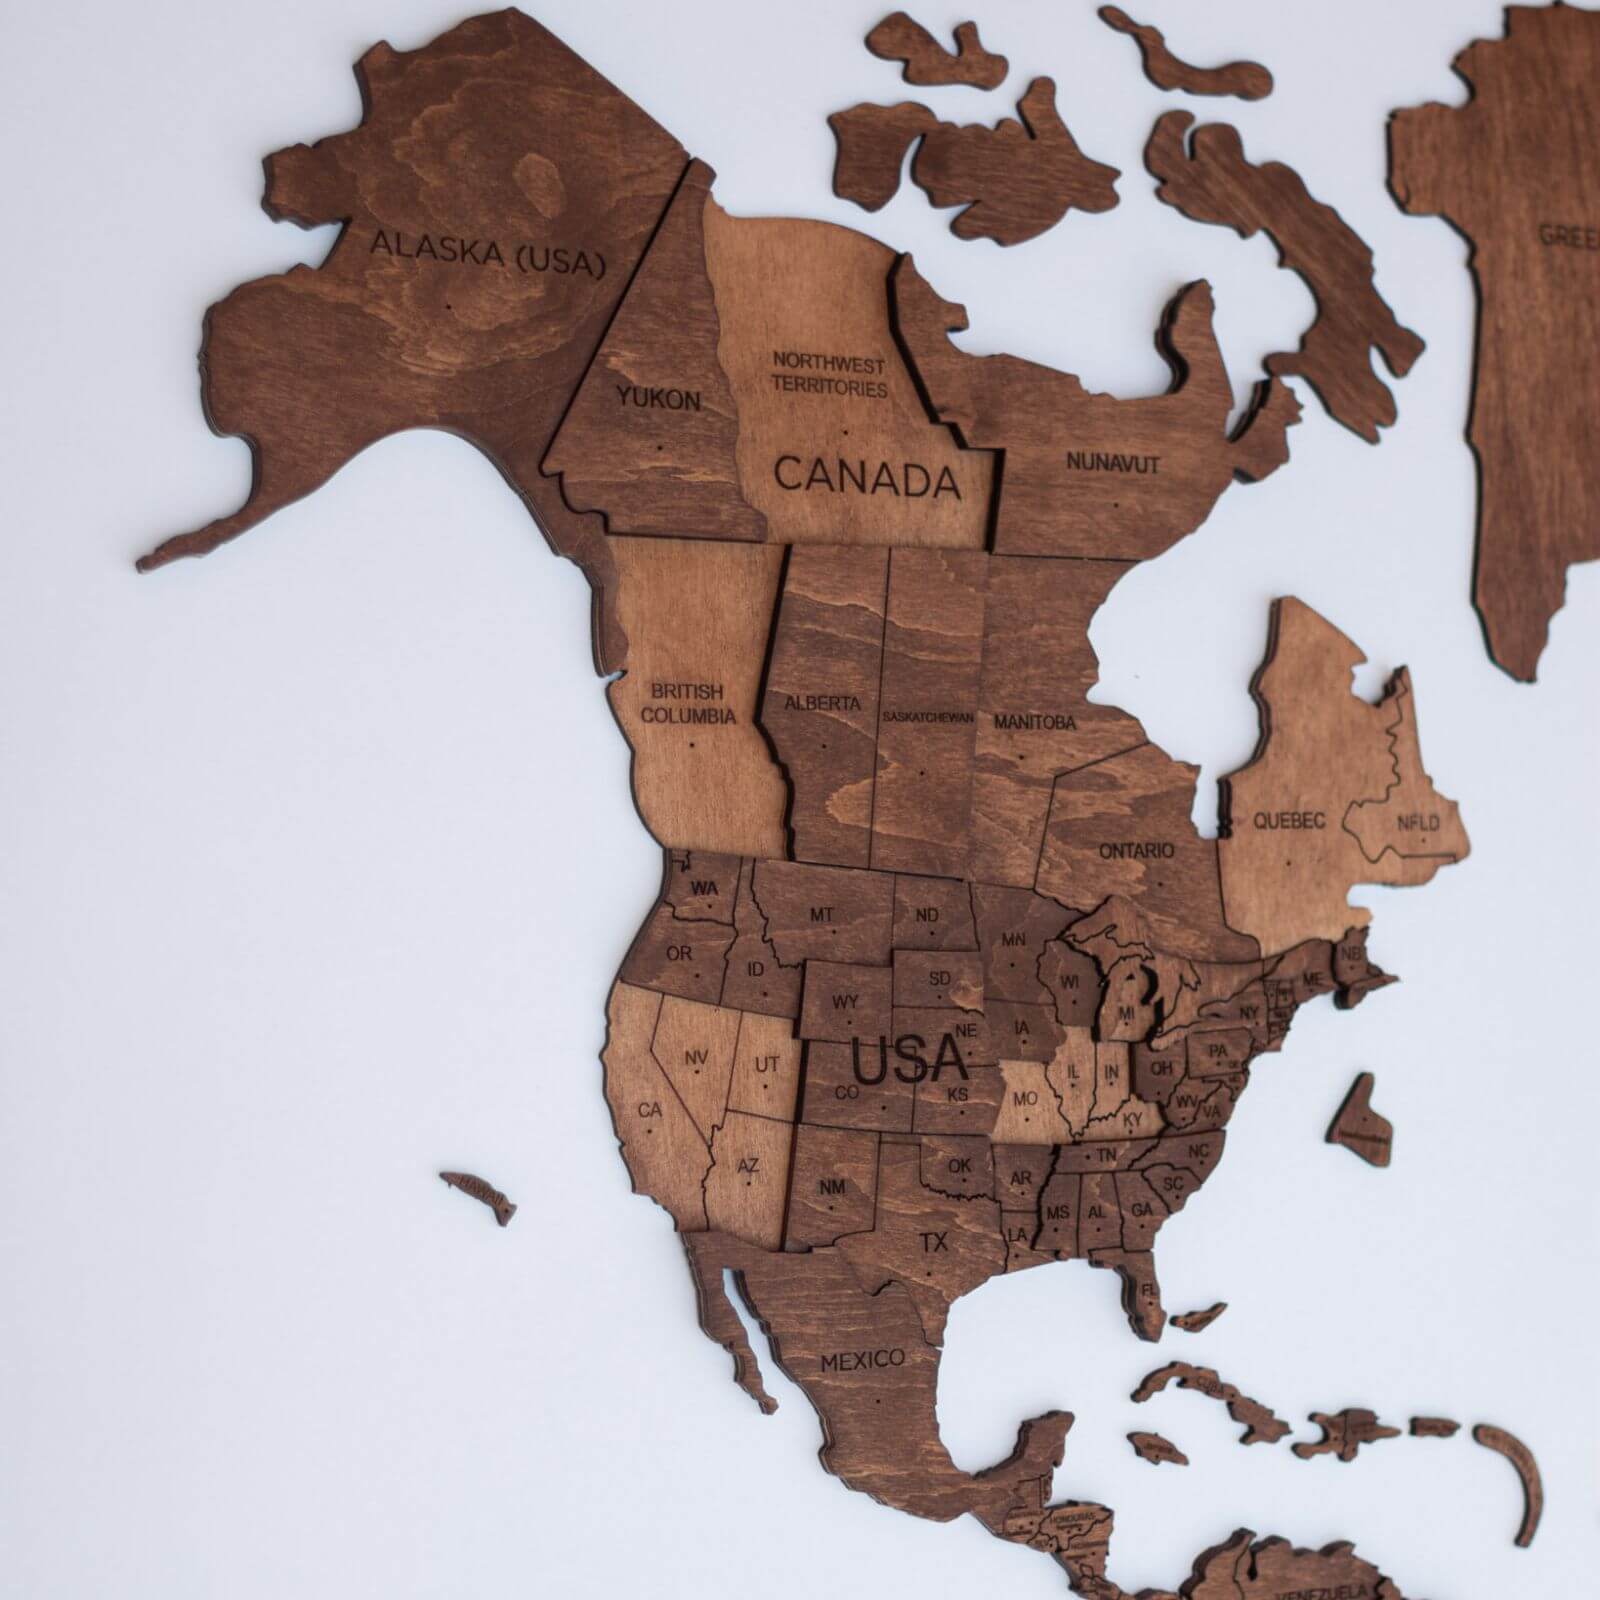 Oakywood's magnetic 3D Wooden World Map wall art hits one of the best  prices yet at $120 off